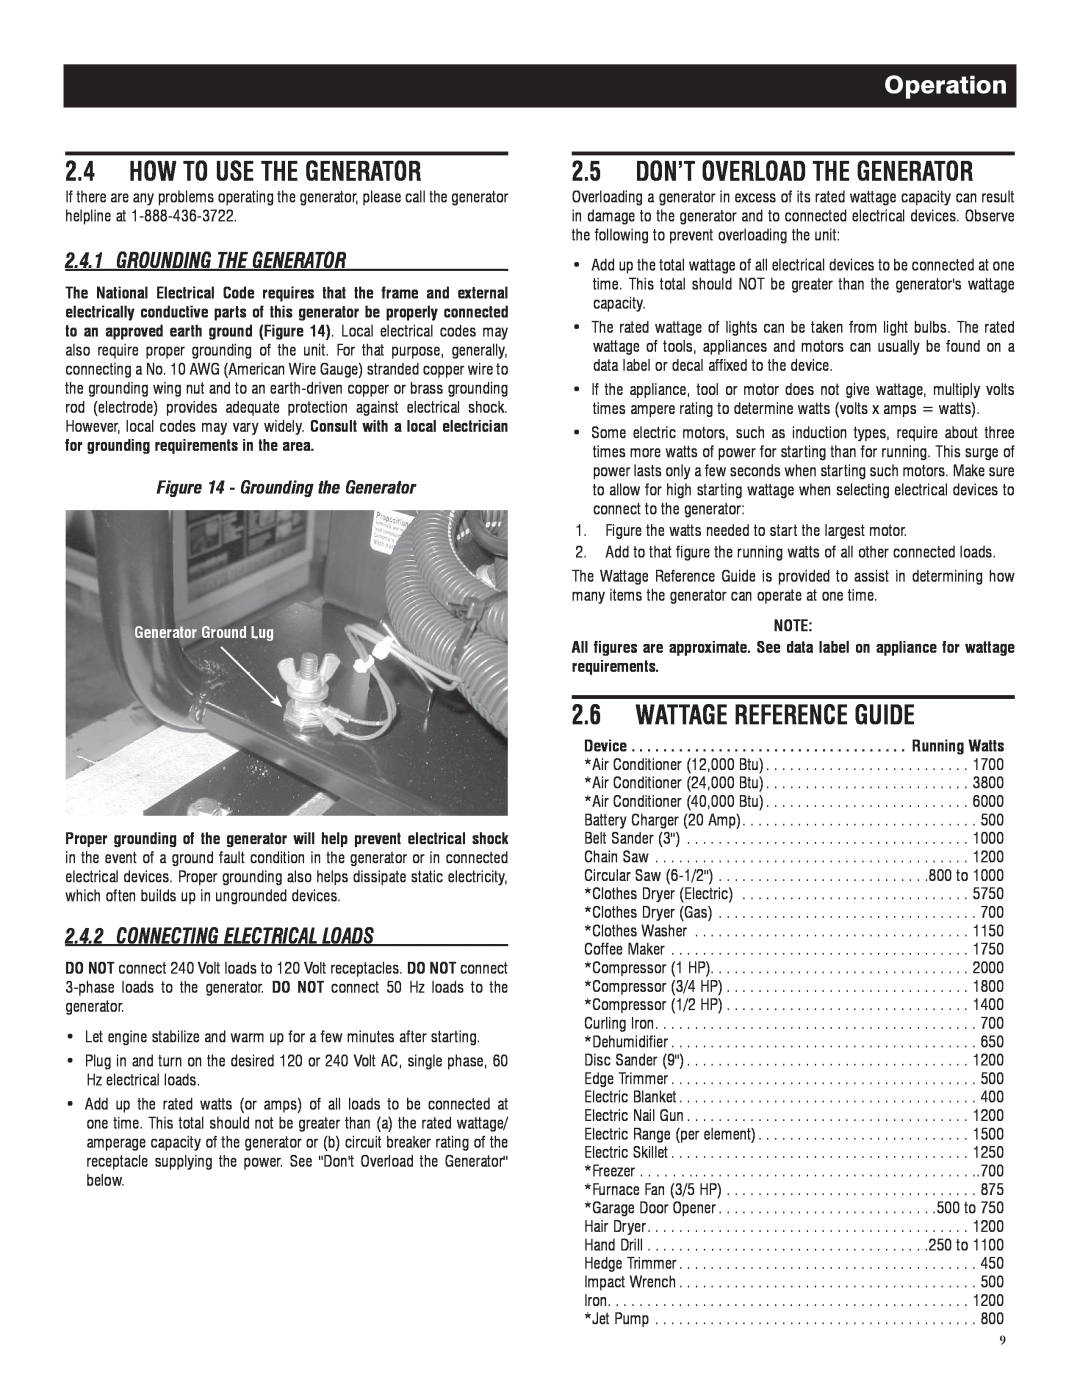 Generac 005735-0, 005734-0 How To Use The Generator, Wattage Reference Guide, 2.5 DON’T OVERLOAD THE GENERATOR, Operation 